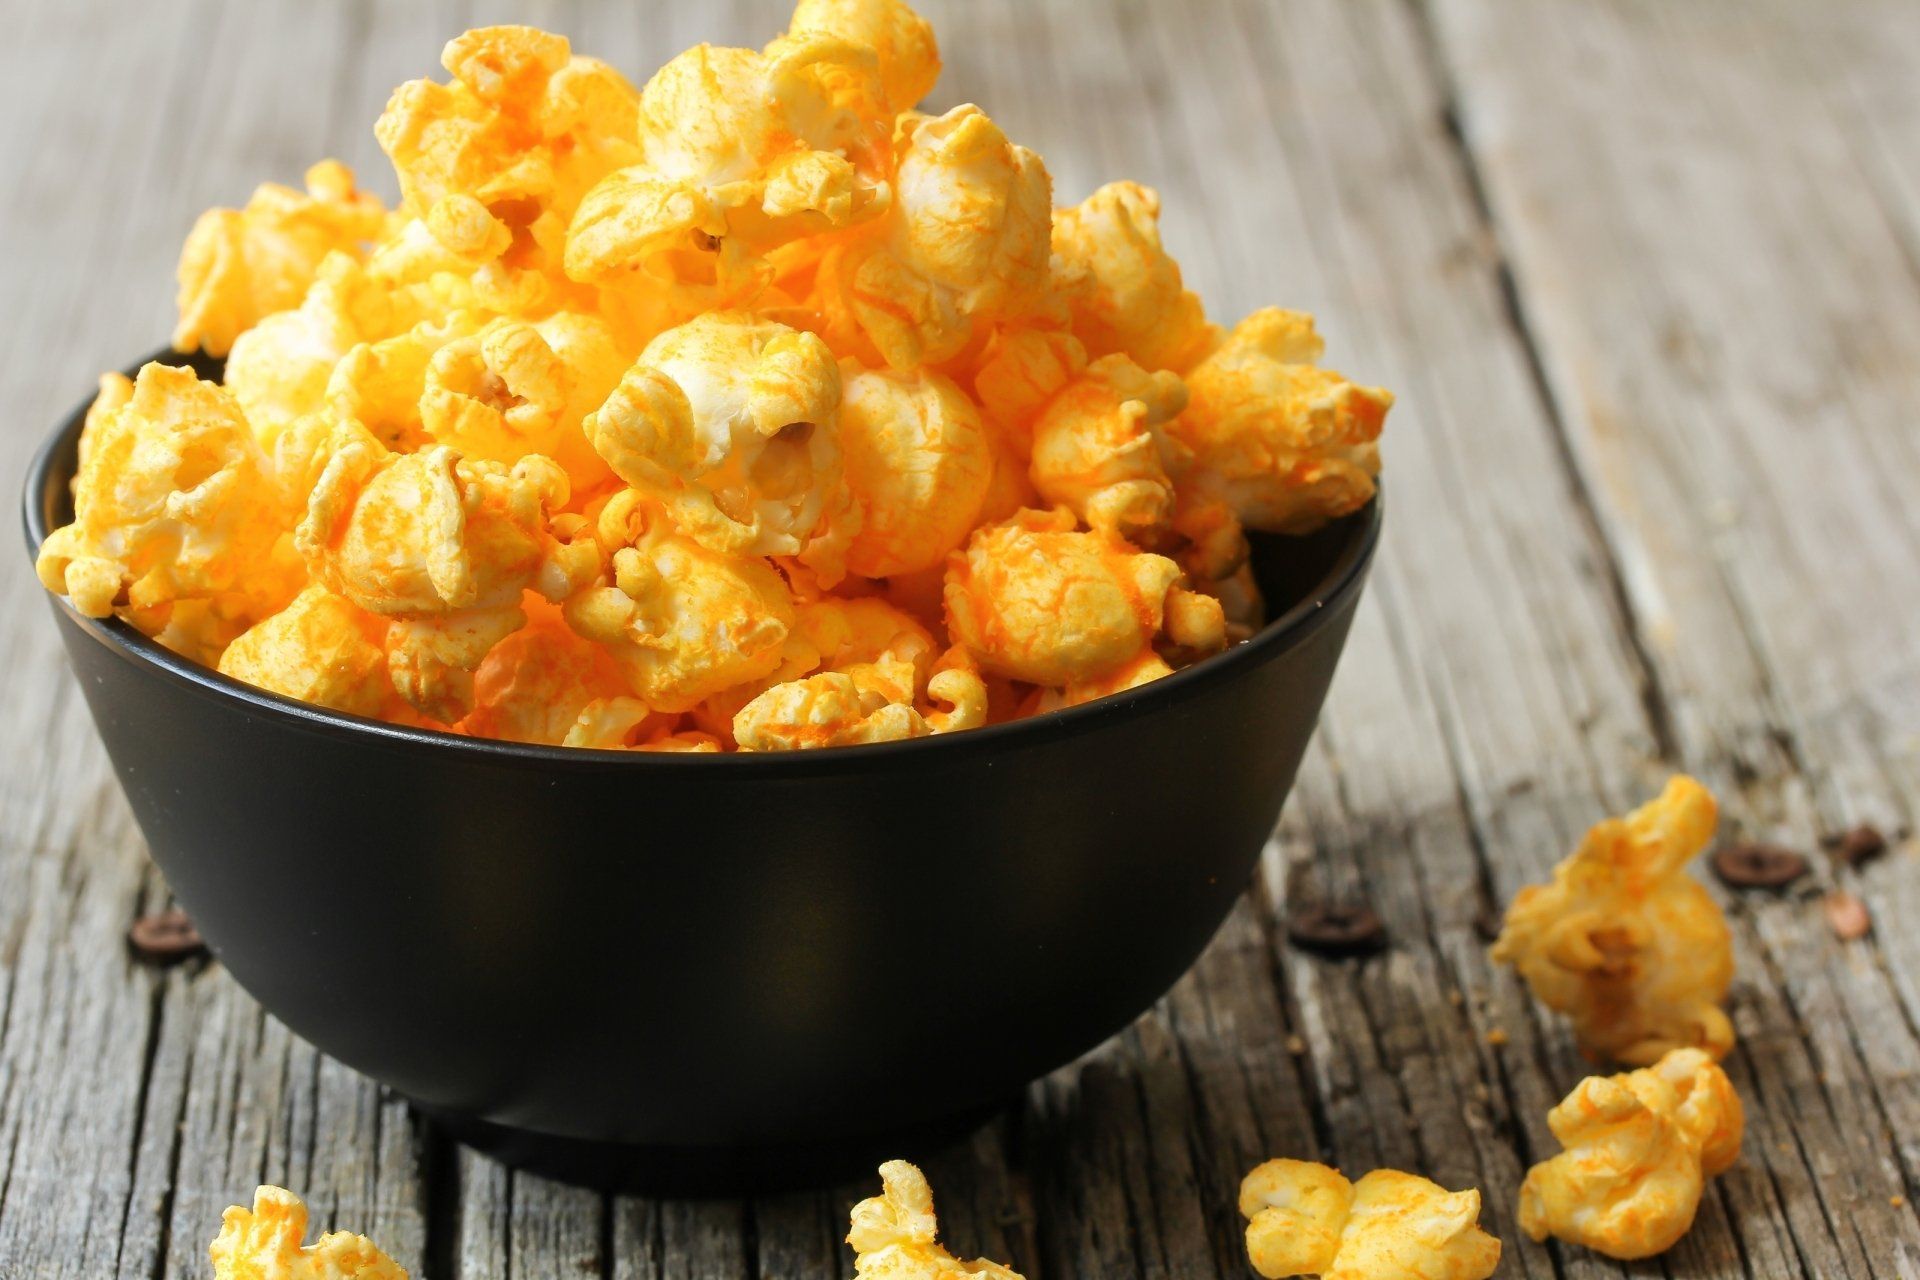 Cheddar Cheese Popcorn Popcorn from Maier's Gourmet Popcorn | Formerly Docs Gourmet Popcorn